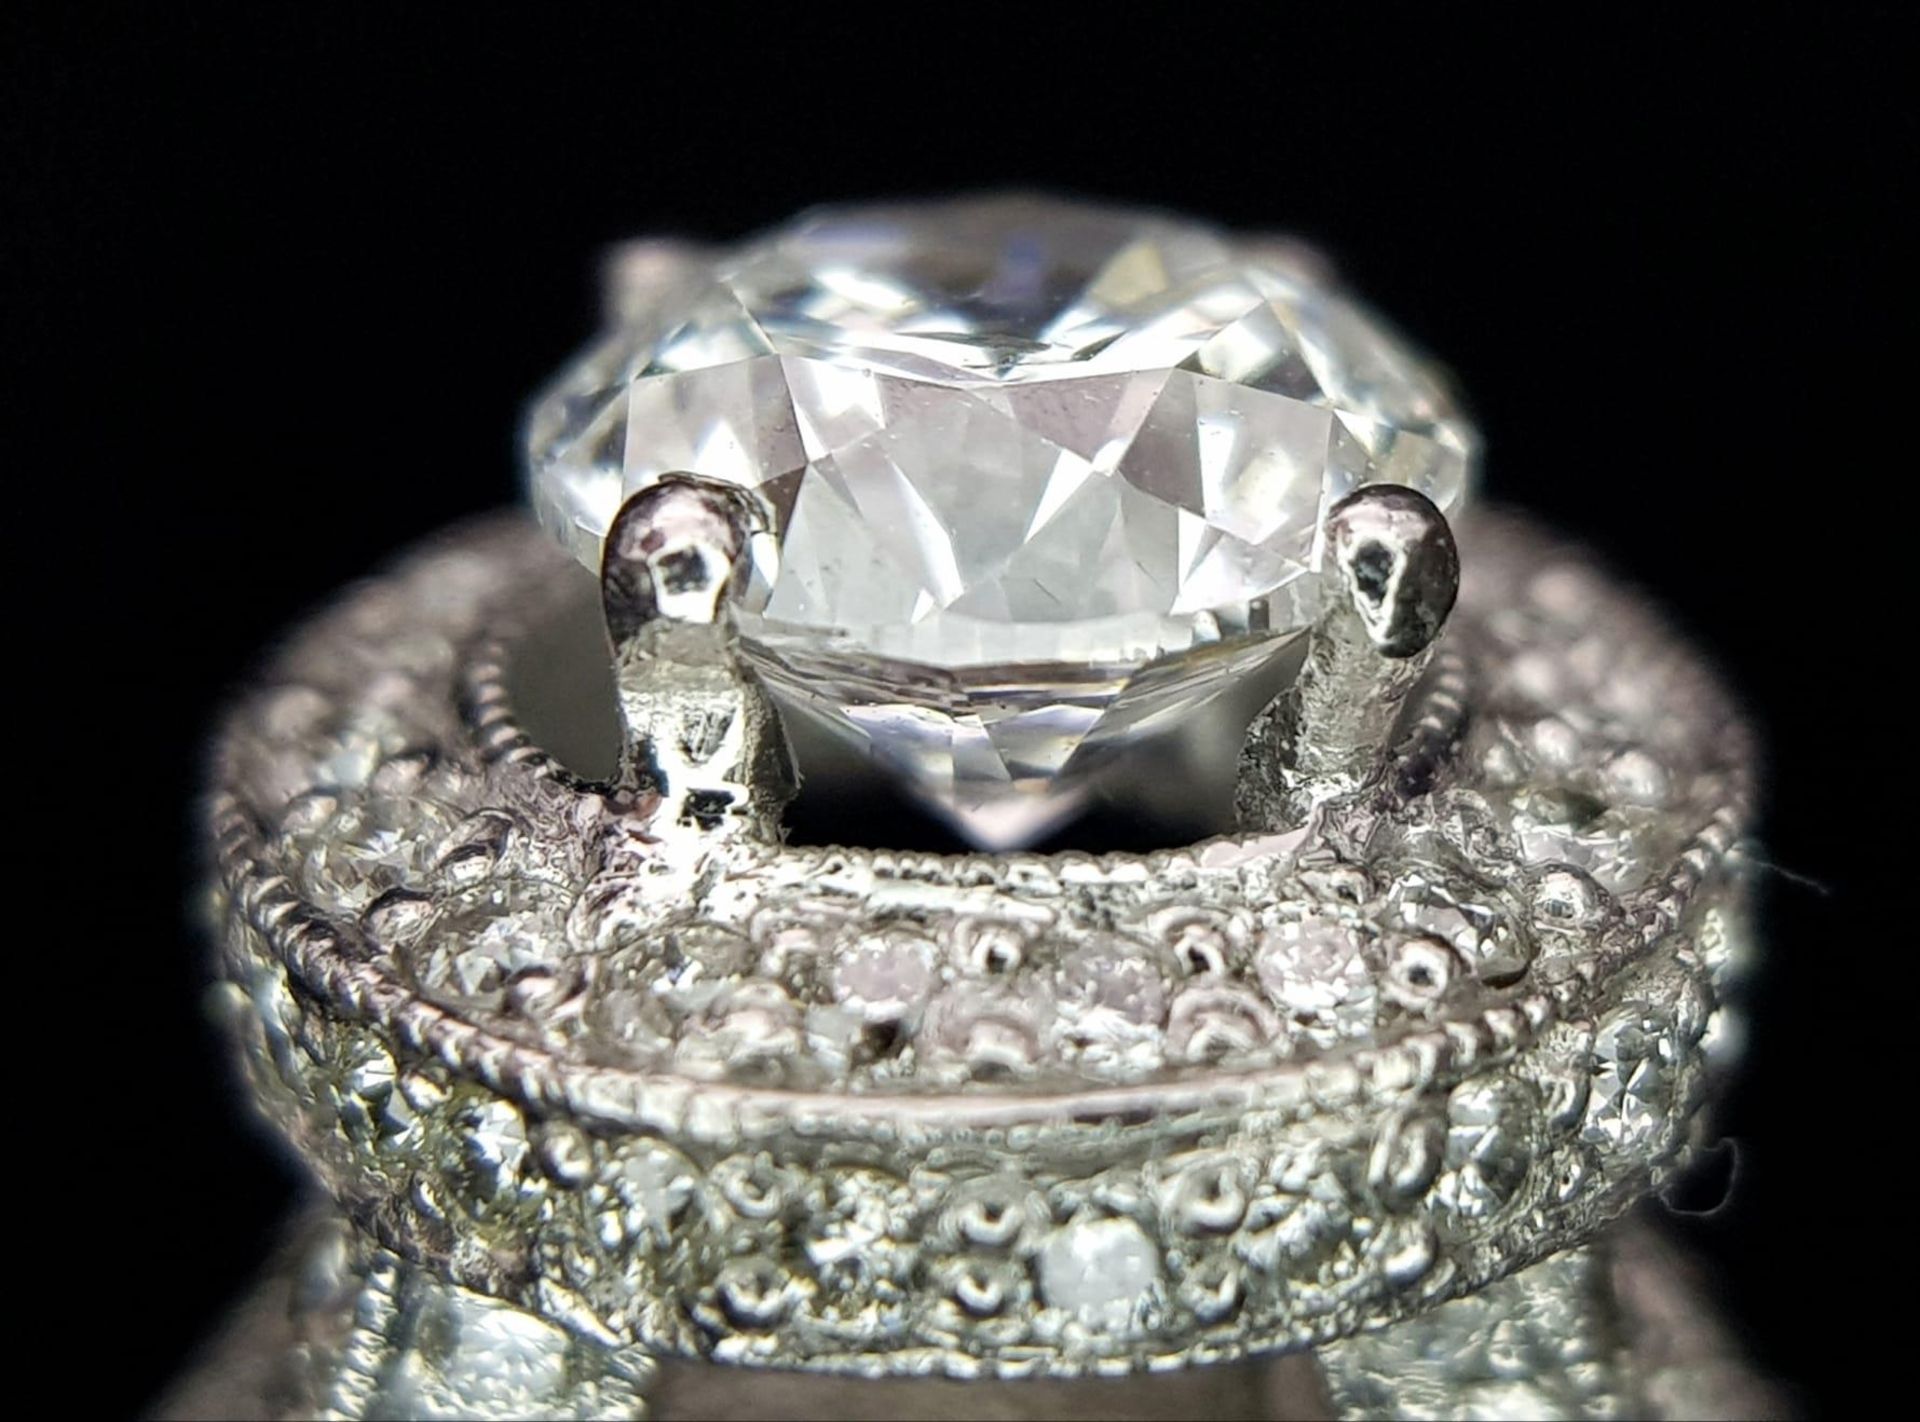 An 18 K white gold ring with a brilliant cut diamond (1.01 carats) surrounded by diamonds on the top - Image 6 of 22